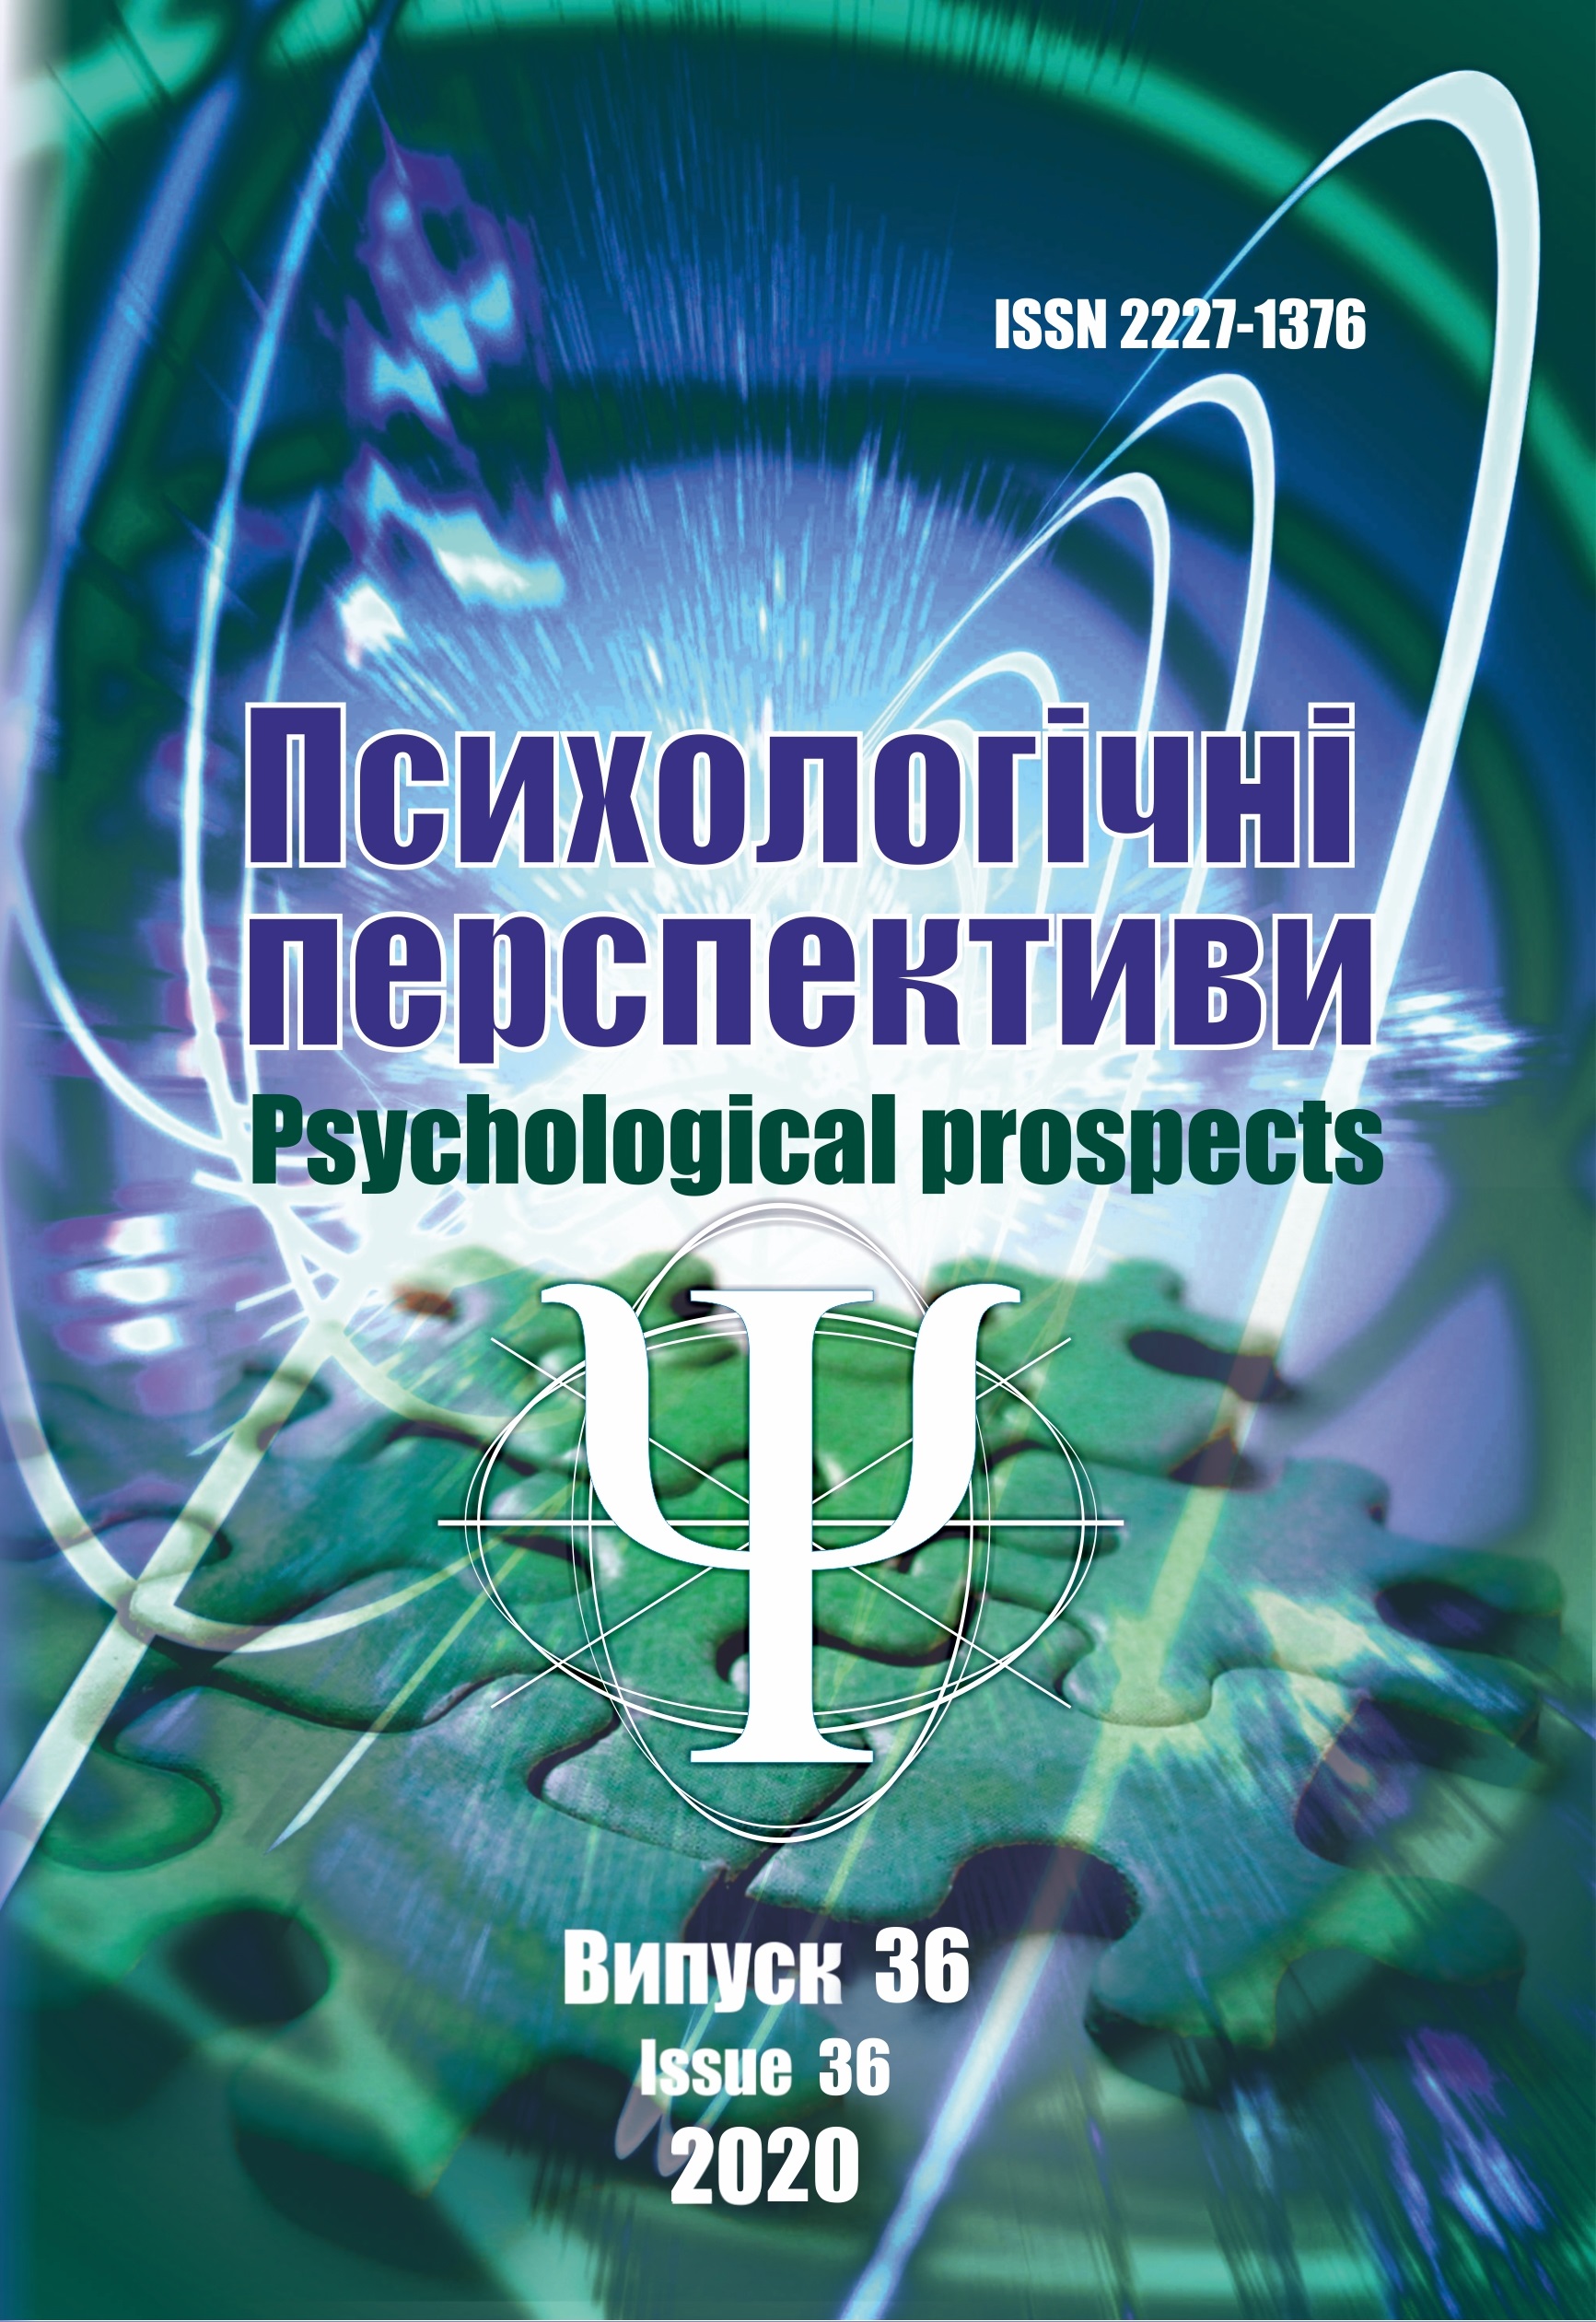 					View No. 36 (2020): Psychological Prospects Journal
				